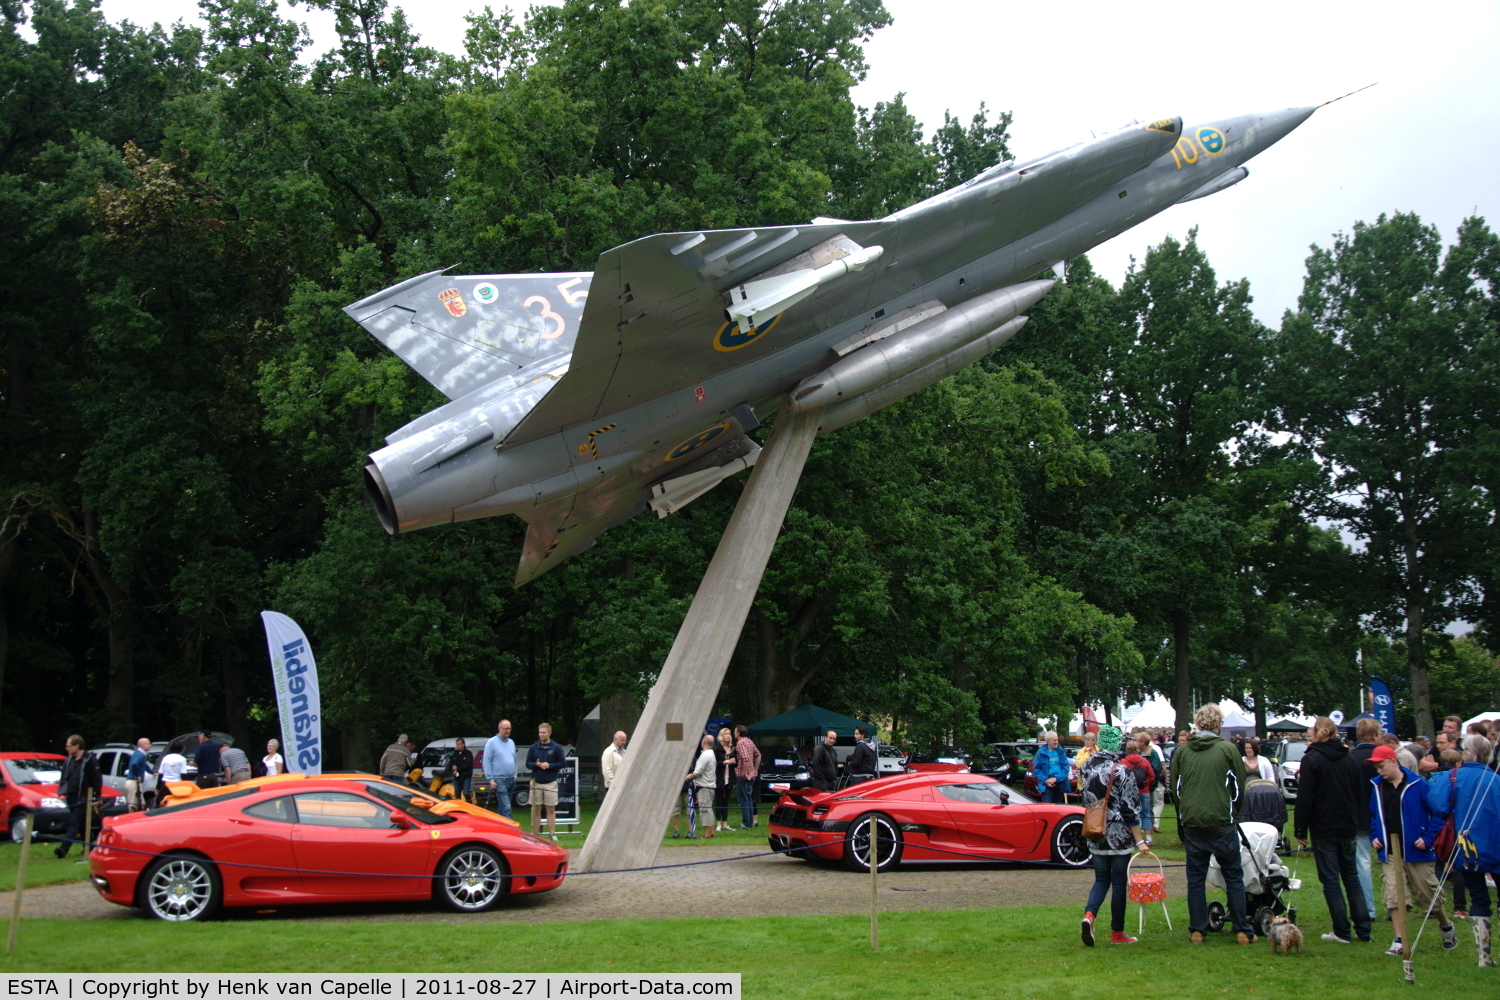 Ängelholm-Helsingborg Airport, Ängelholm / Helsingborg Sweden (ESTA) - This Saab j35J Draken is positioned on a pole in the Valhall Park of the airfield. The sportscars were parked below it for the Lergökarraly 2011.